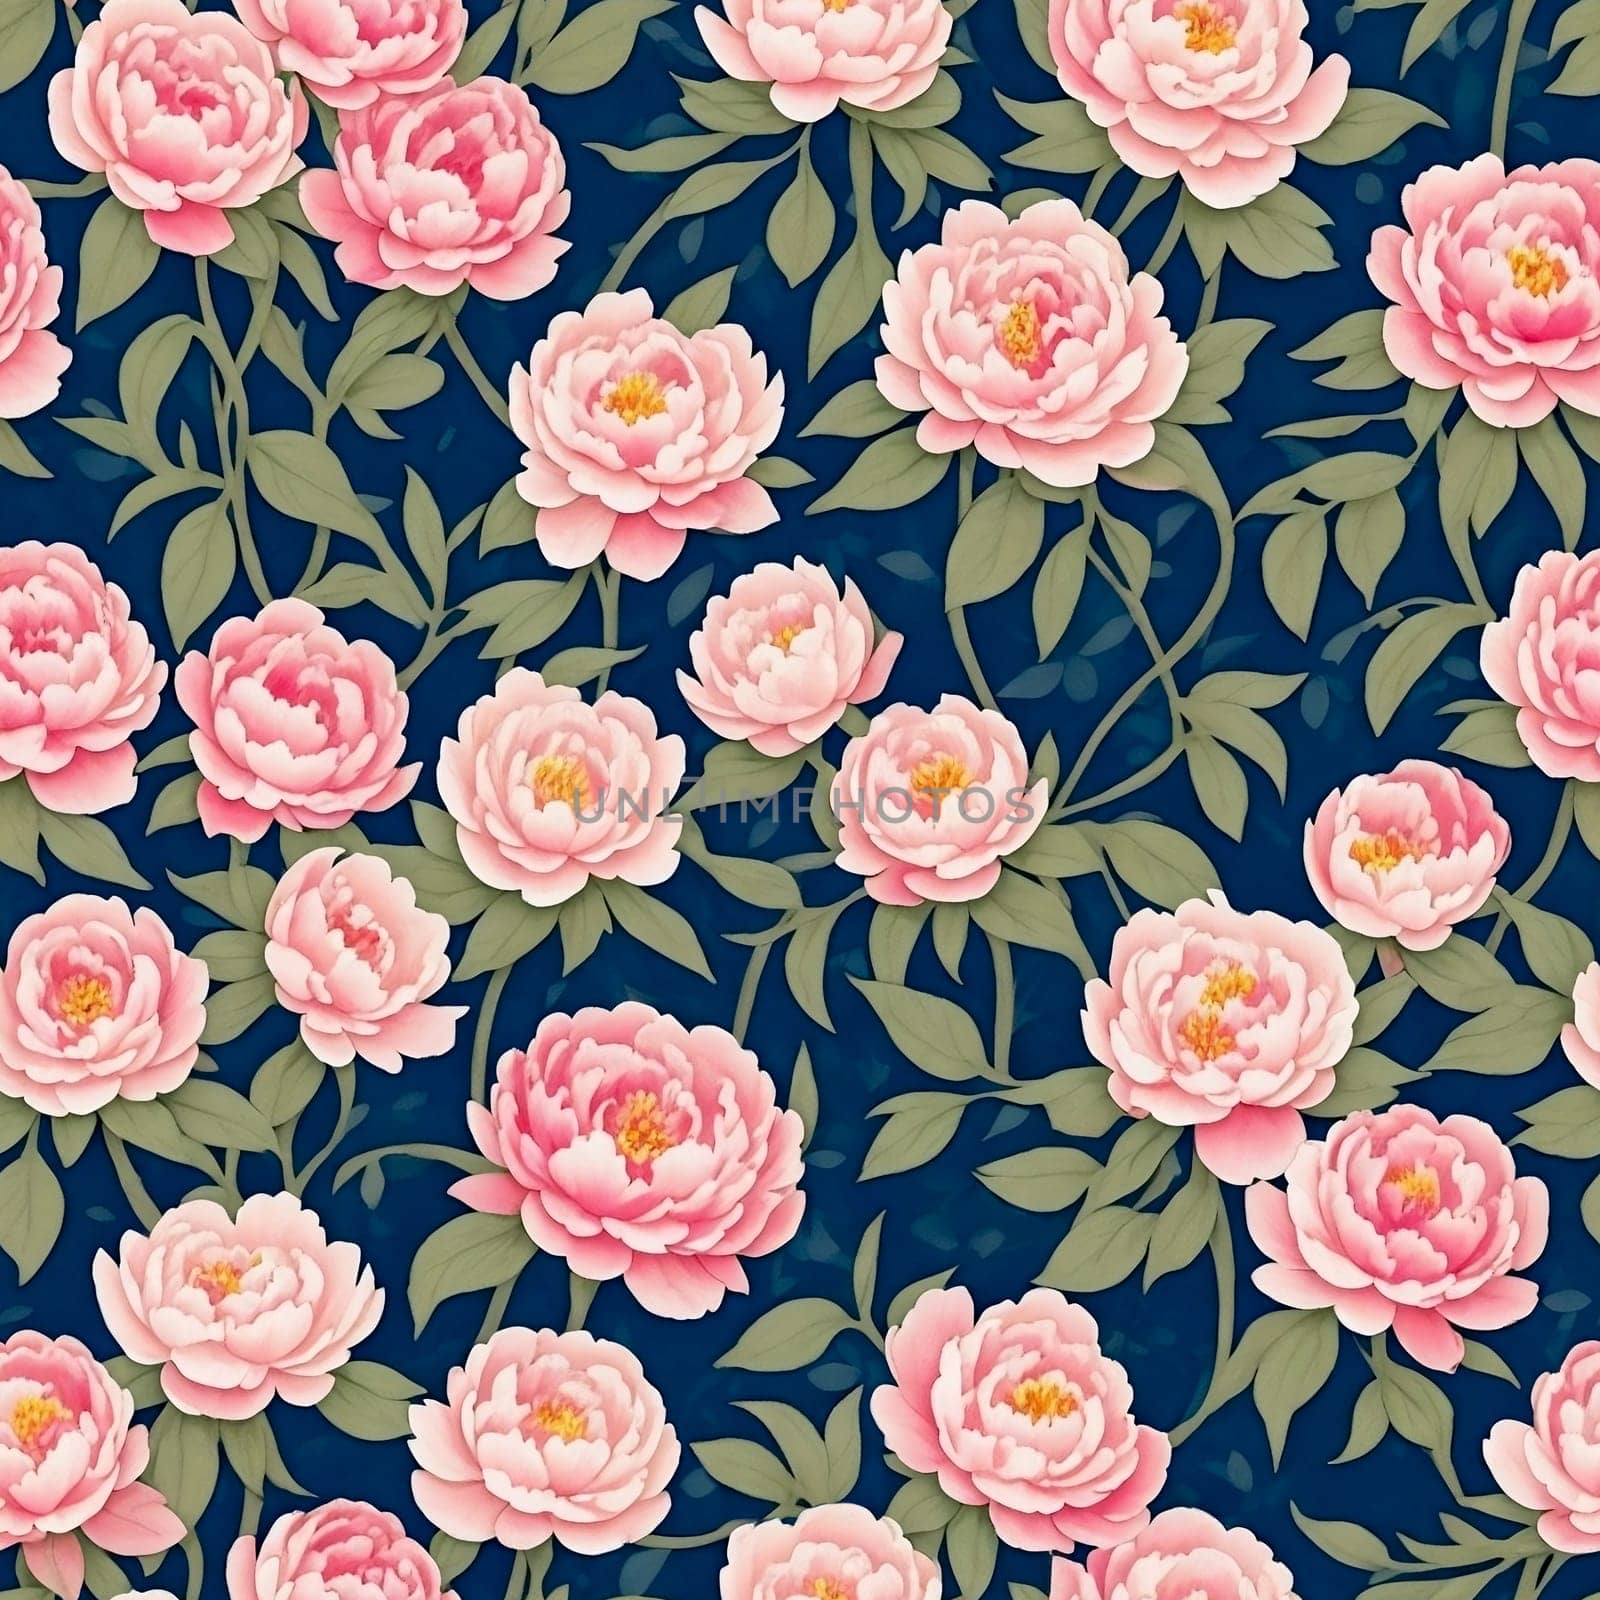 Floral Seamless Pattern with Light Pink Peonies with HkackGreen Leaves on Dark Blue. AI Generated by LanaLeta